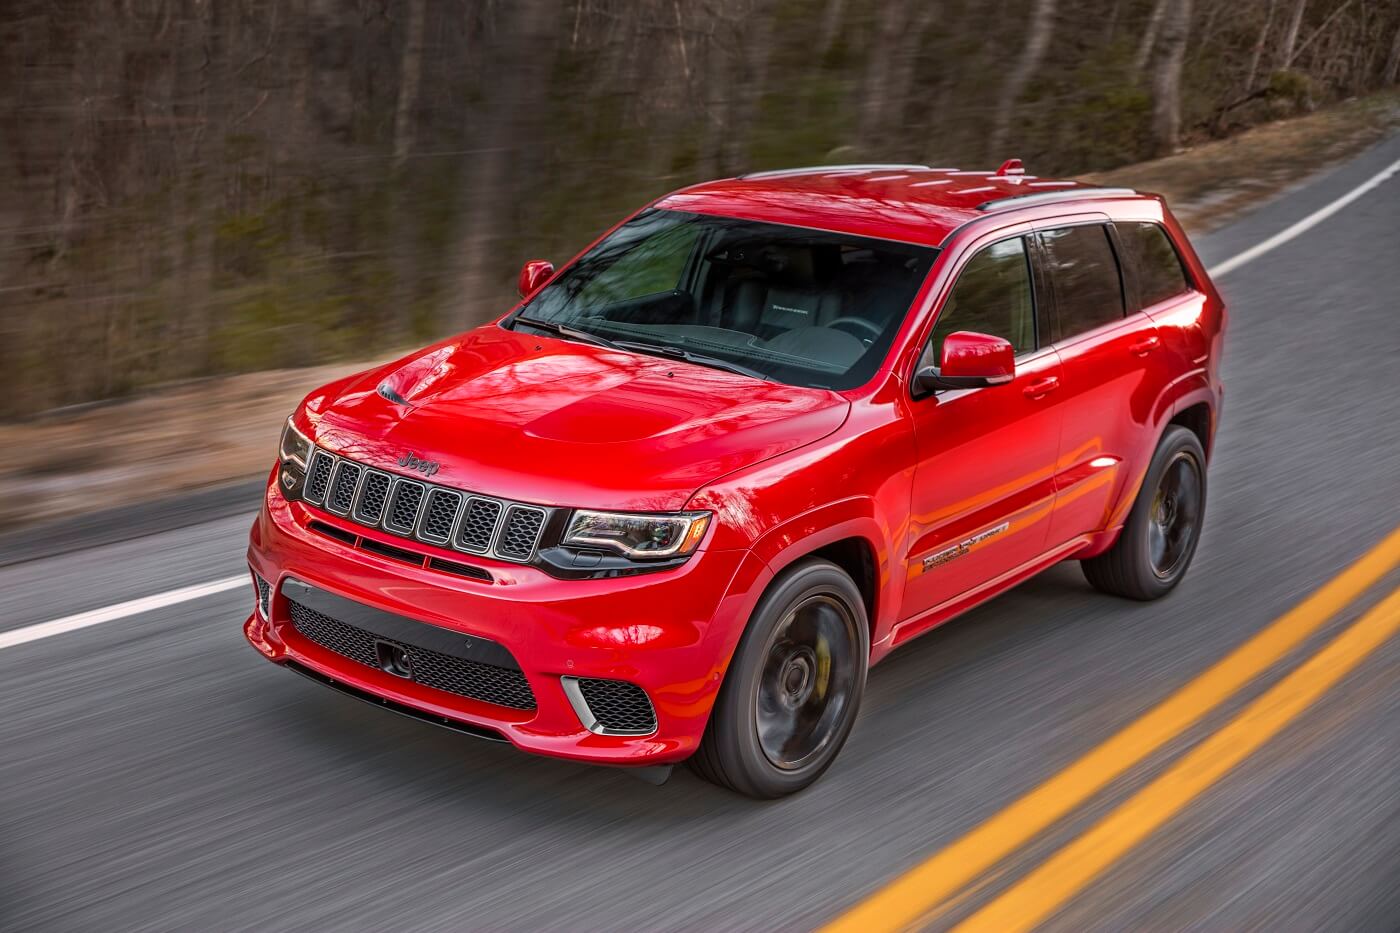 Jeep Grand Cherokee Features